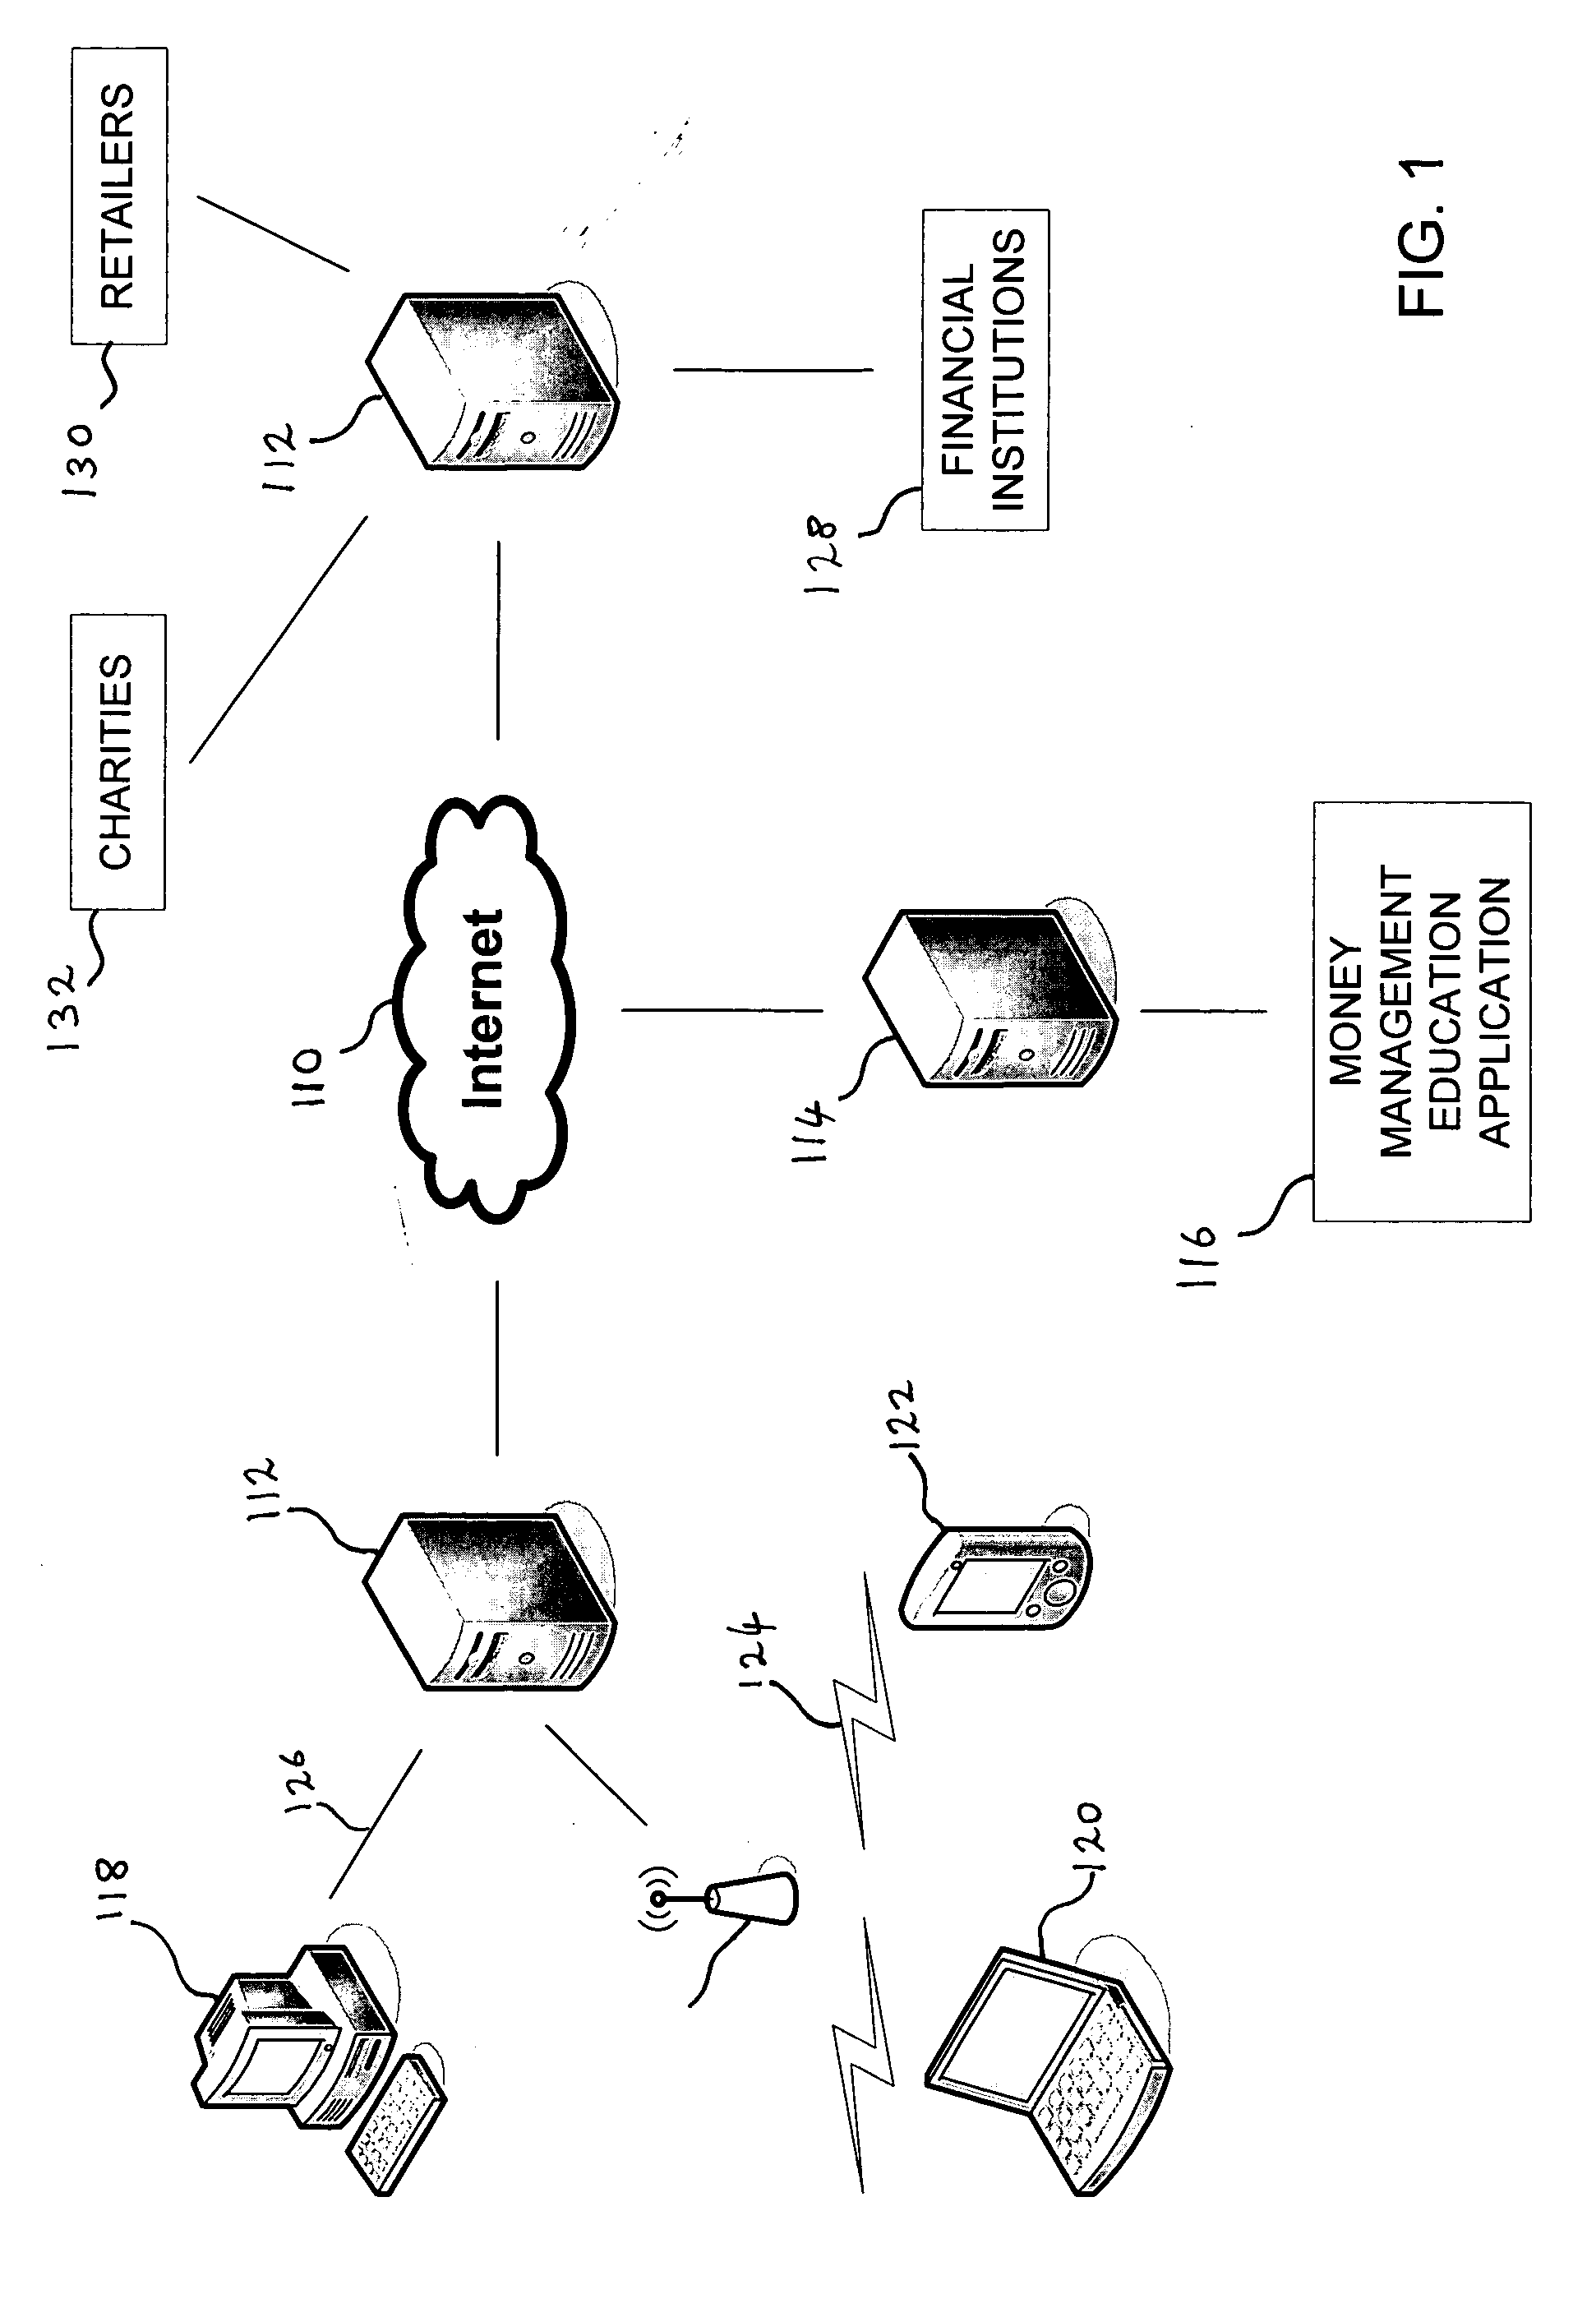 Money management education system, apparatus and method